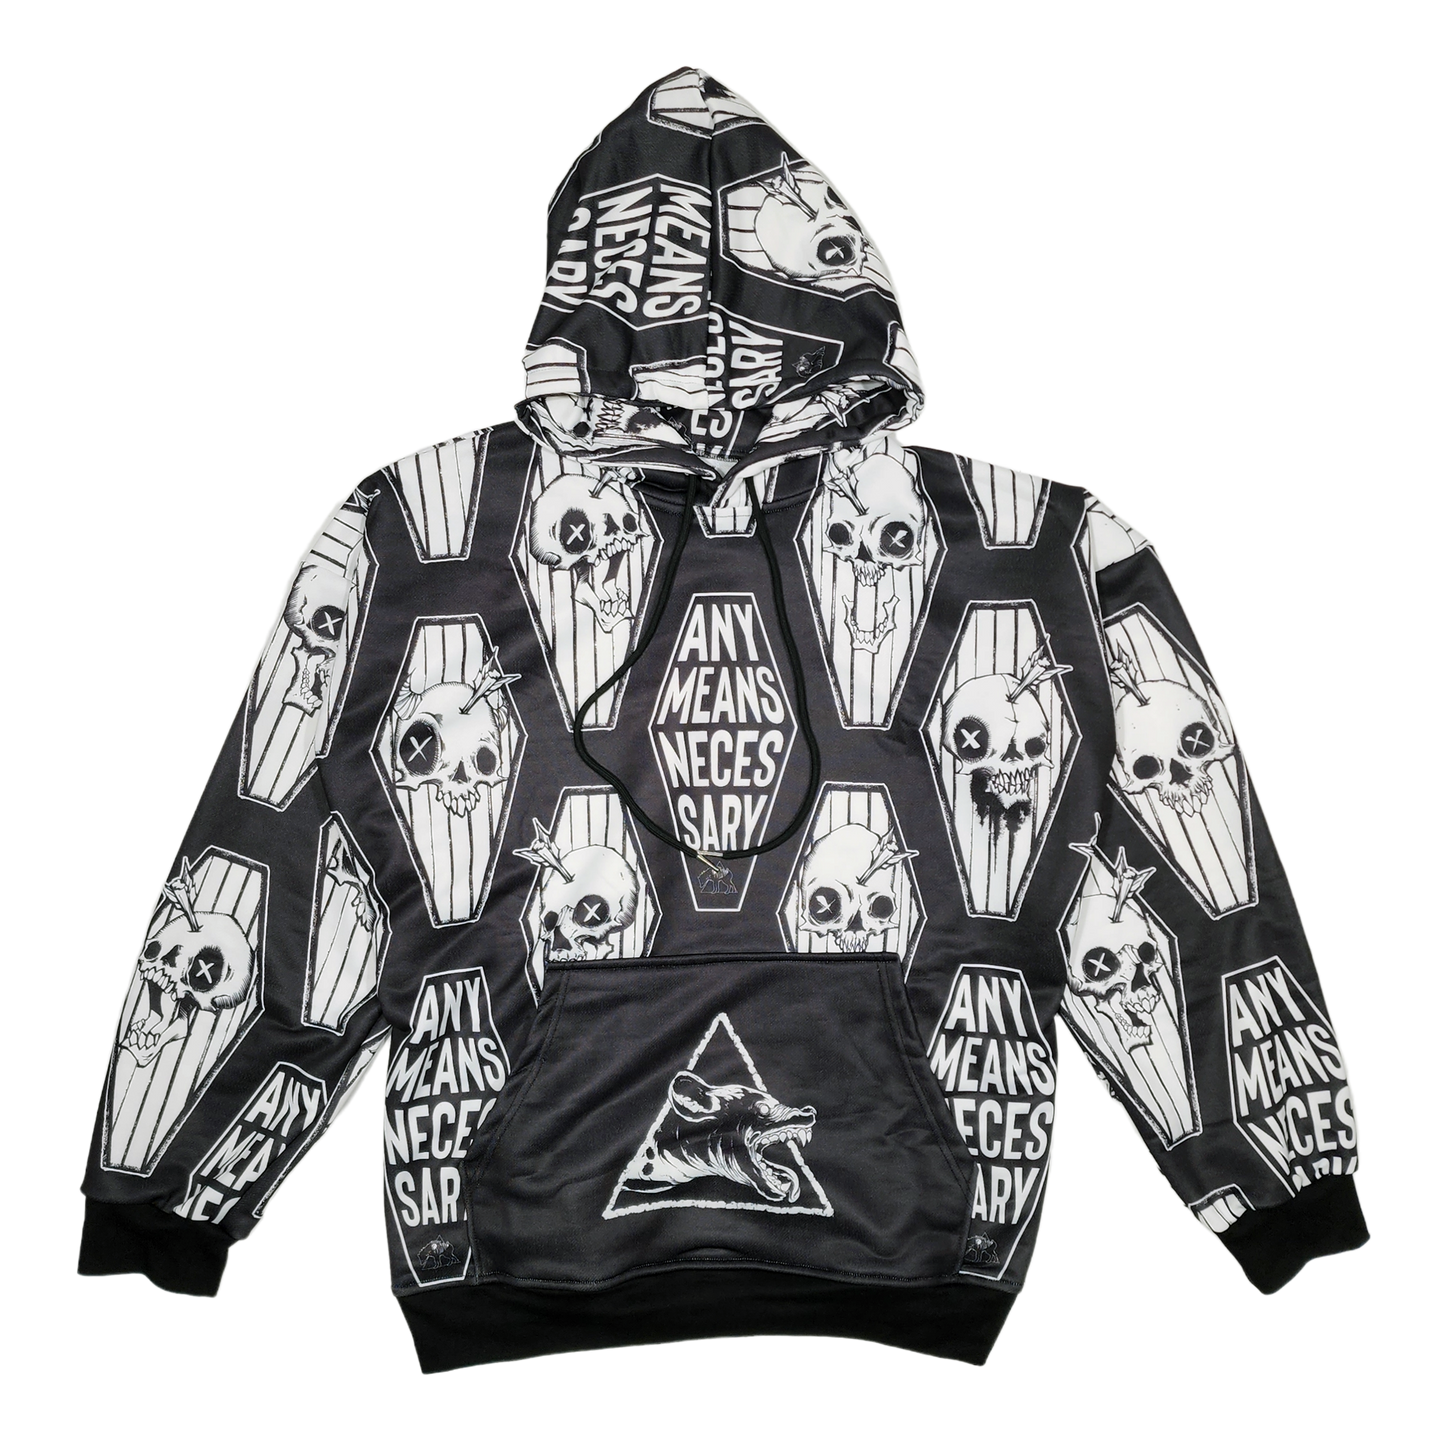 any means necessary shawn coss casket pullover hoodie